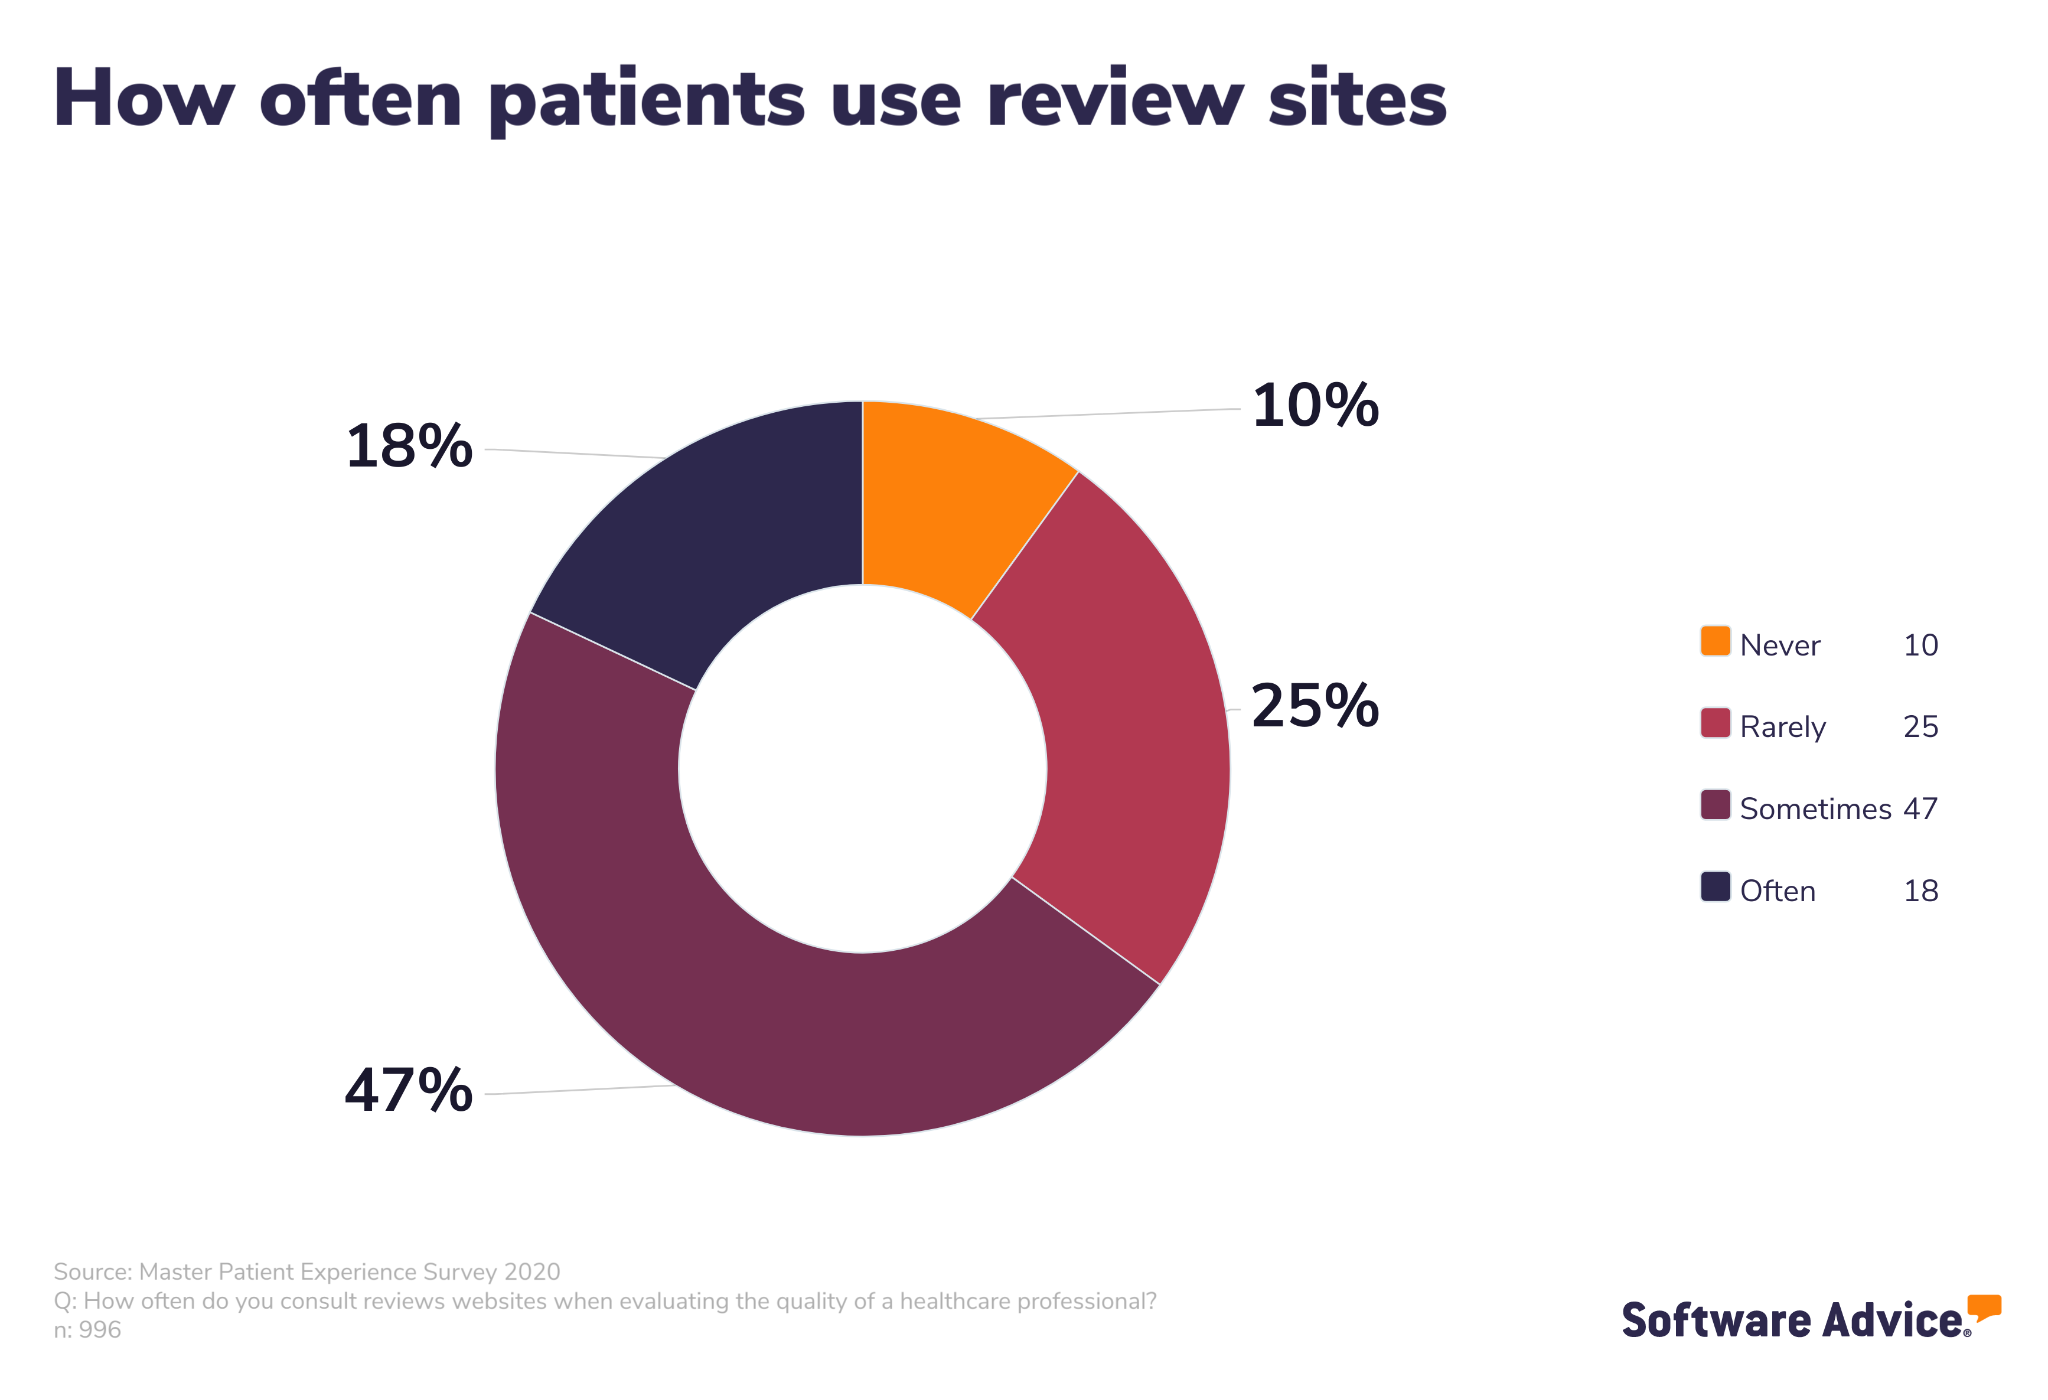 How often patients use review sites